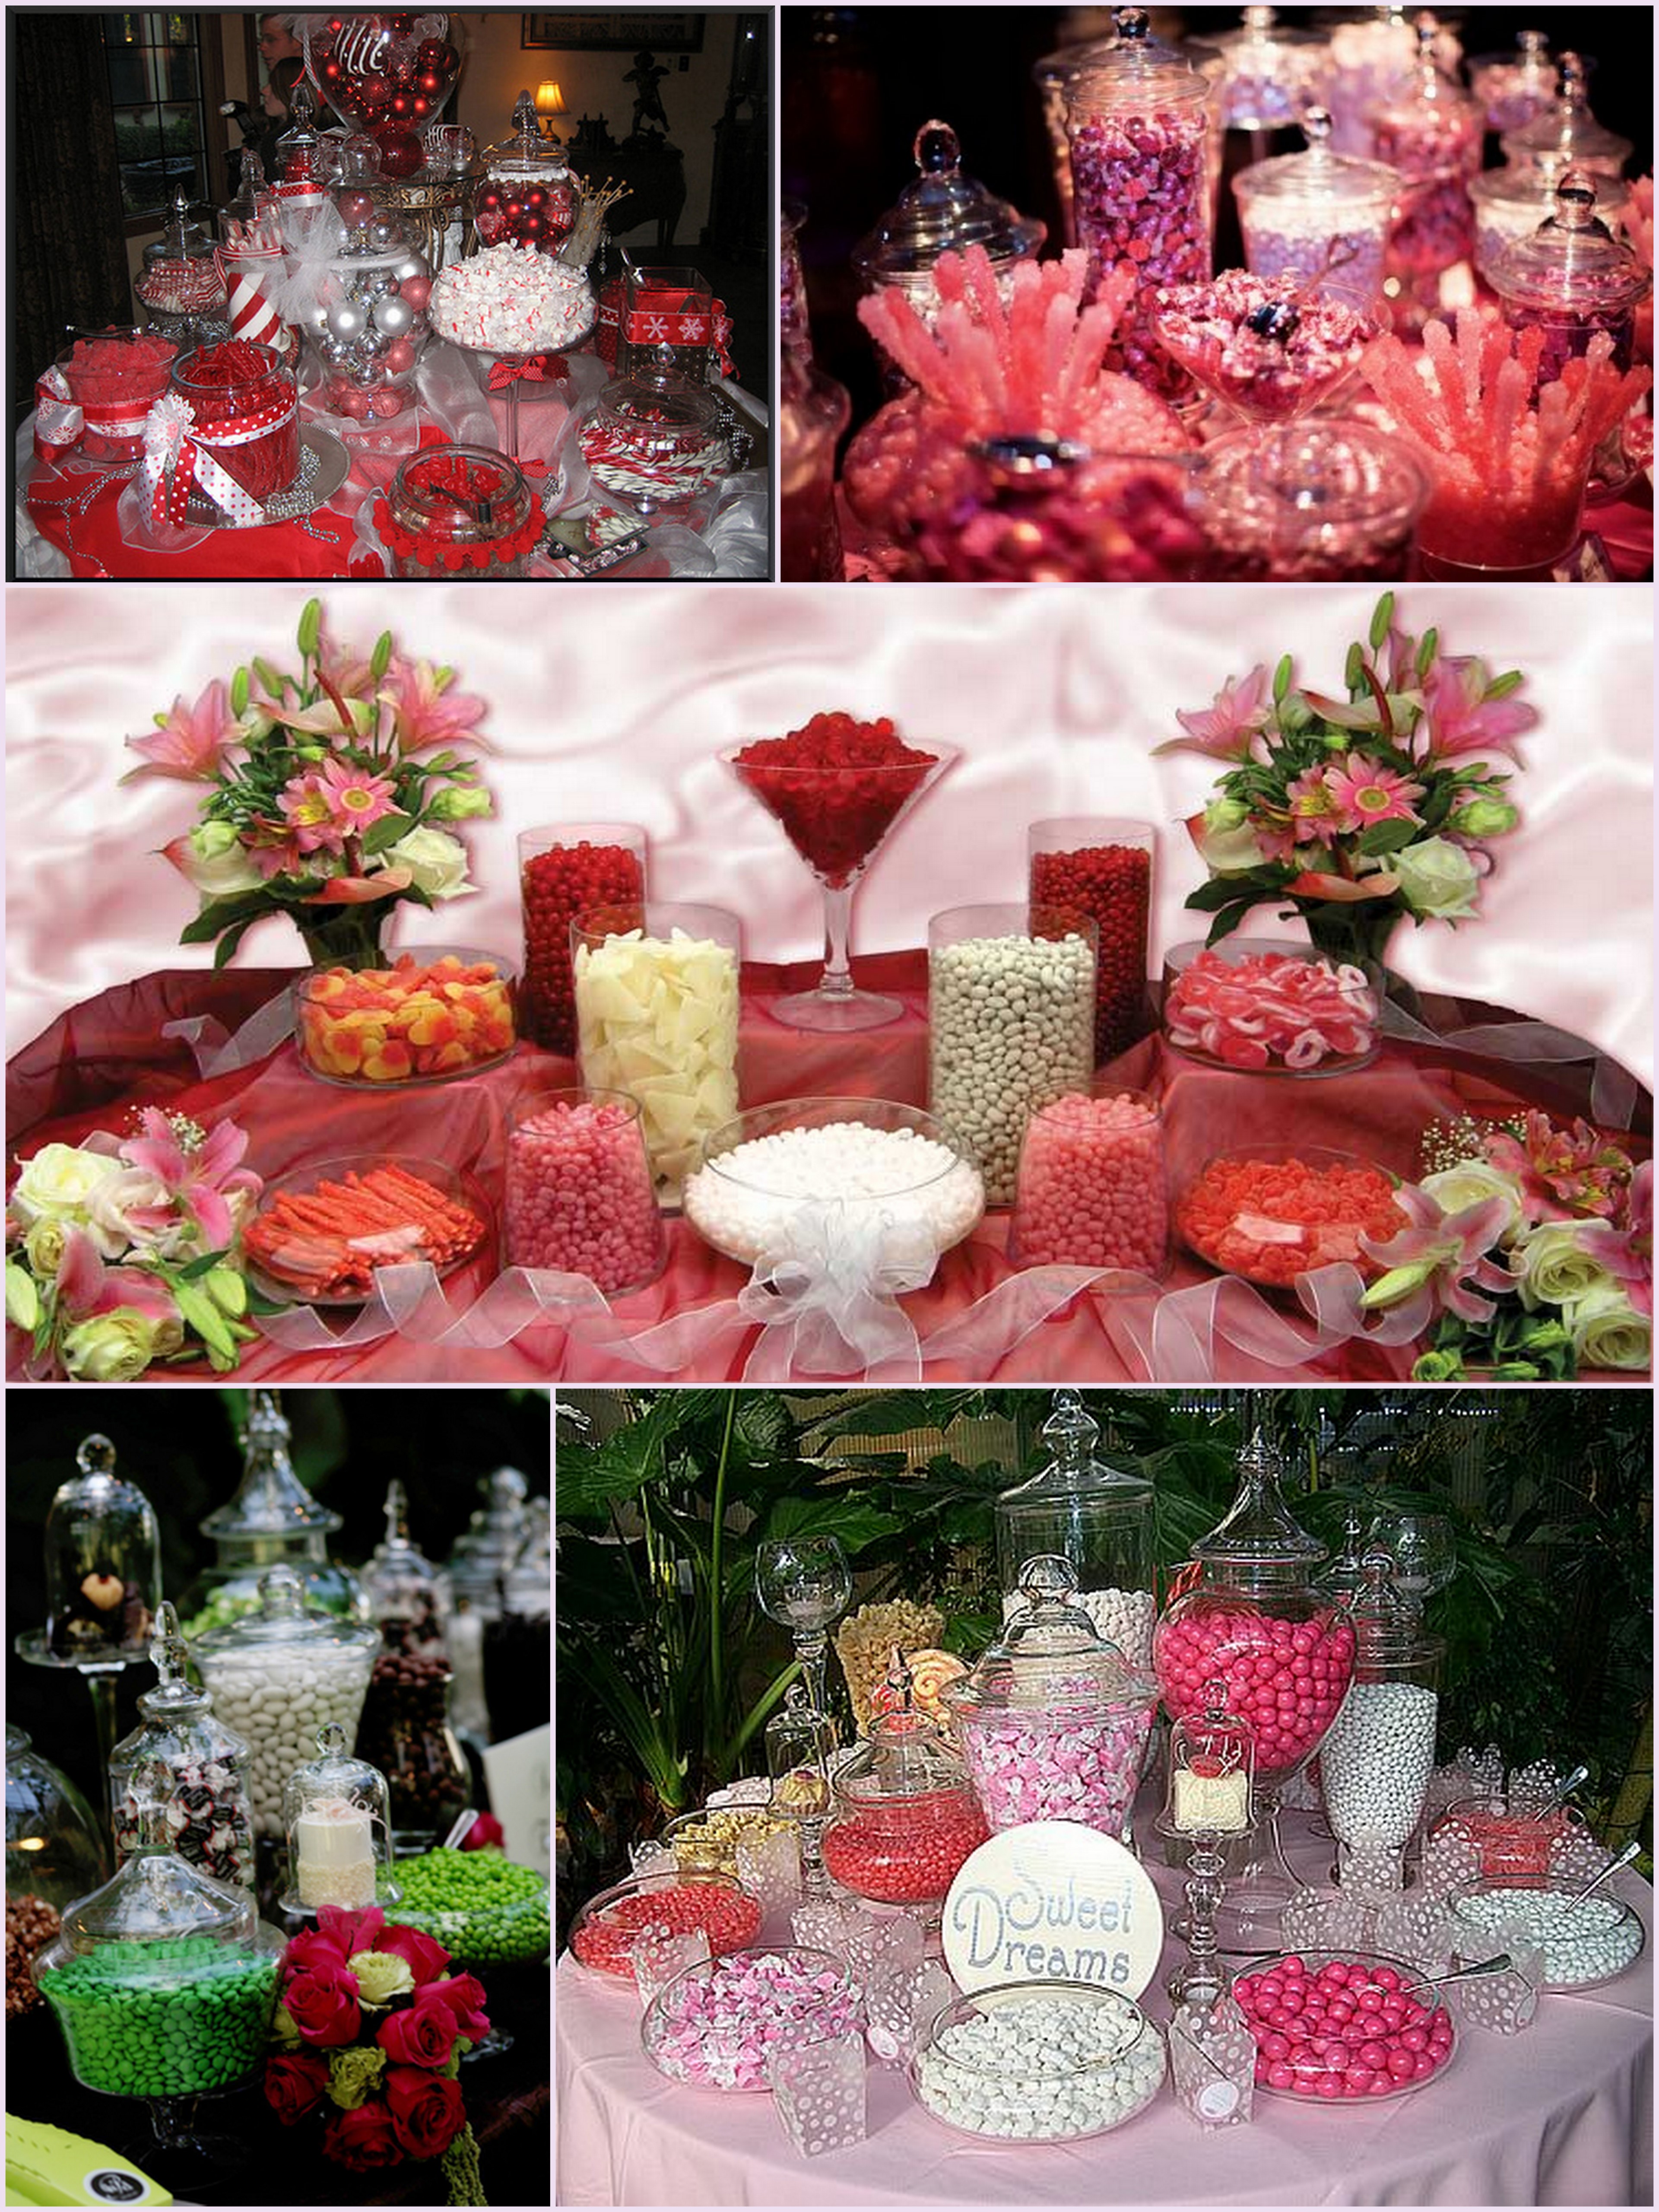 Create a candy buffet at your